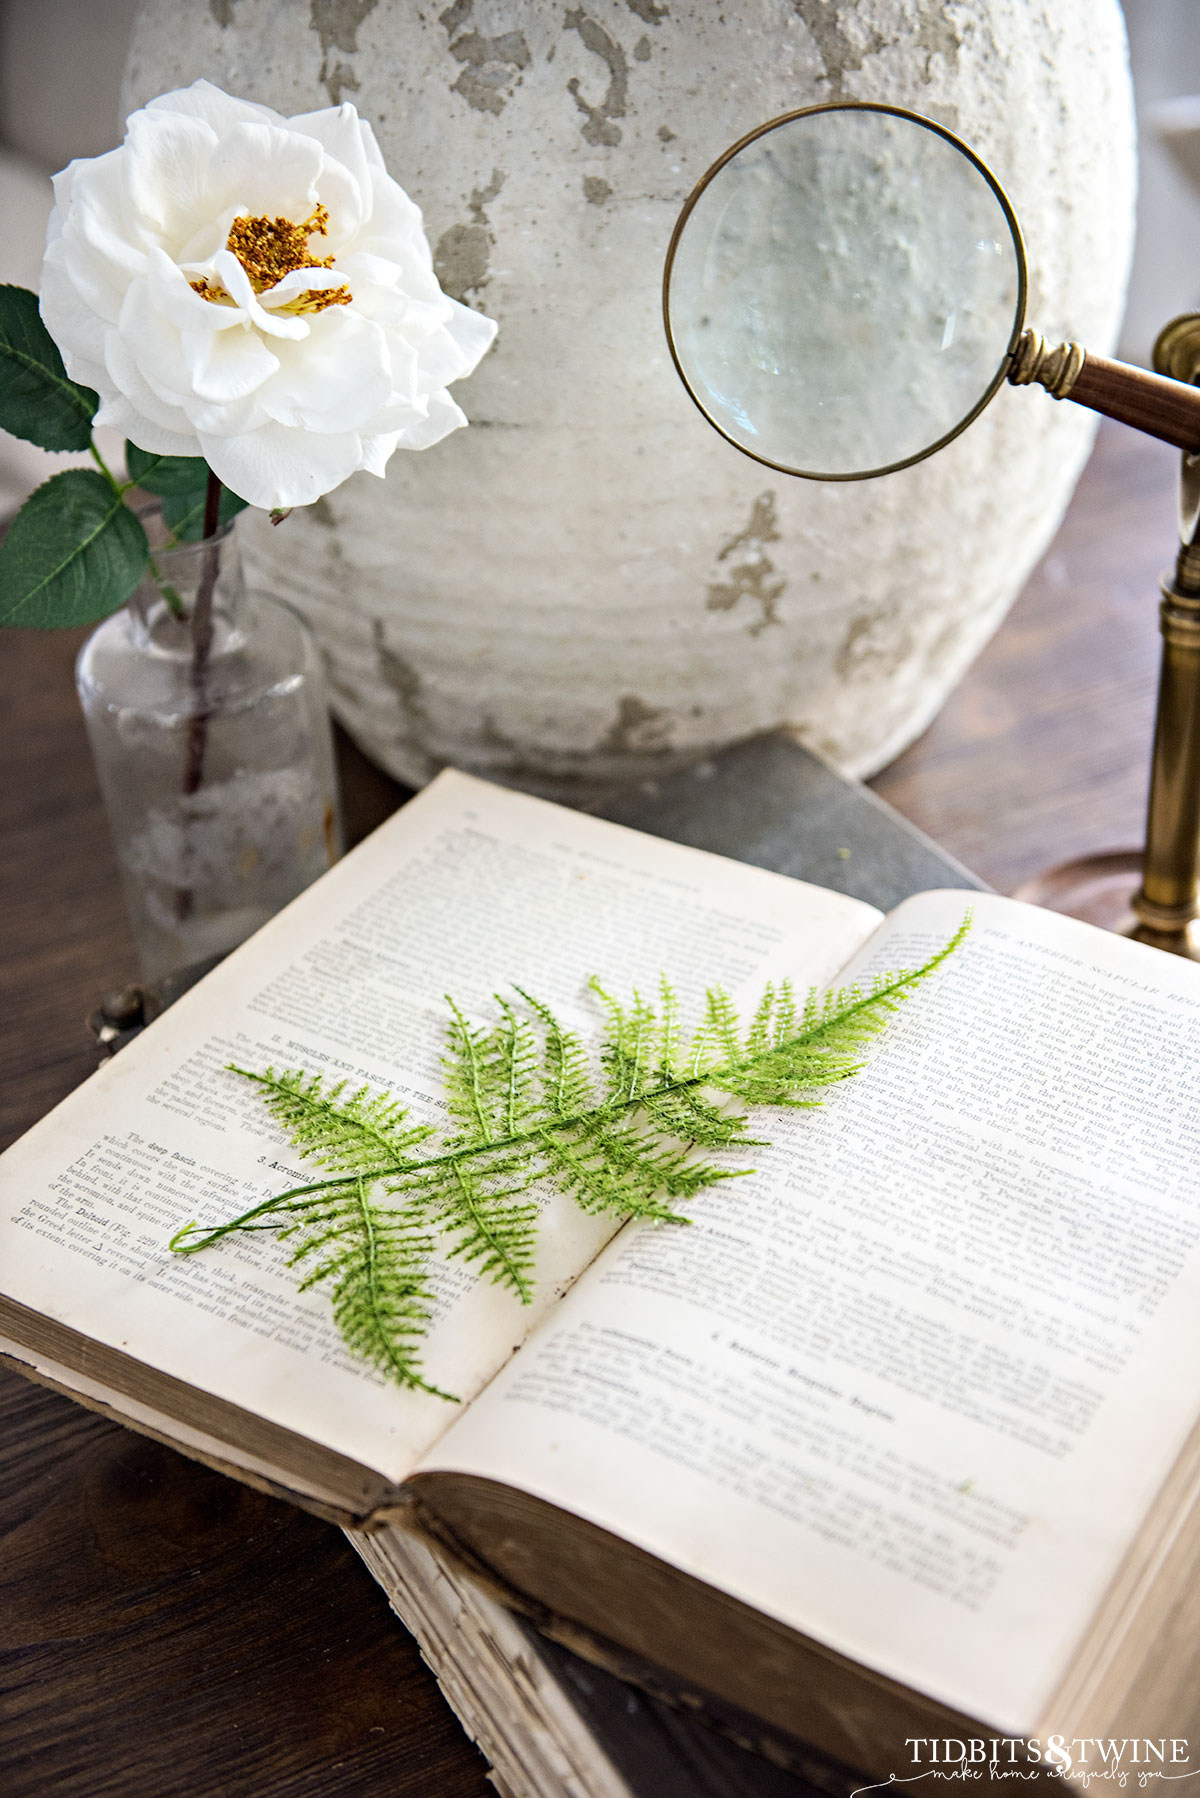 vignette of rustic vase next to antique book open on table with magnifying glass and single white rose